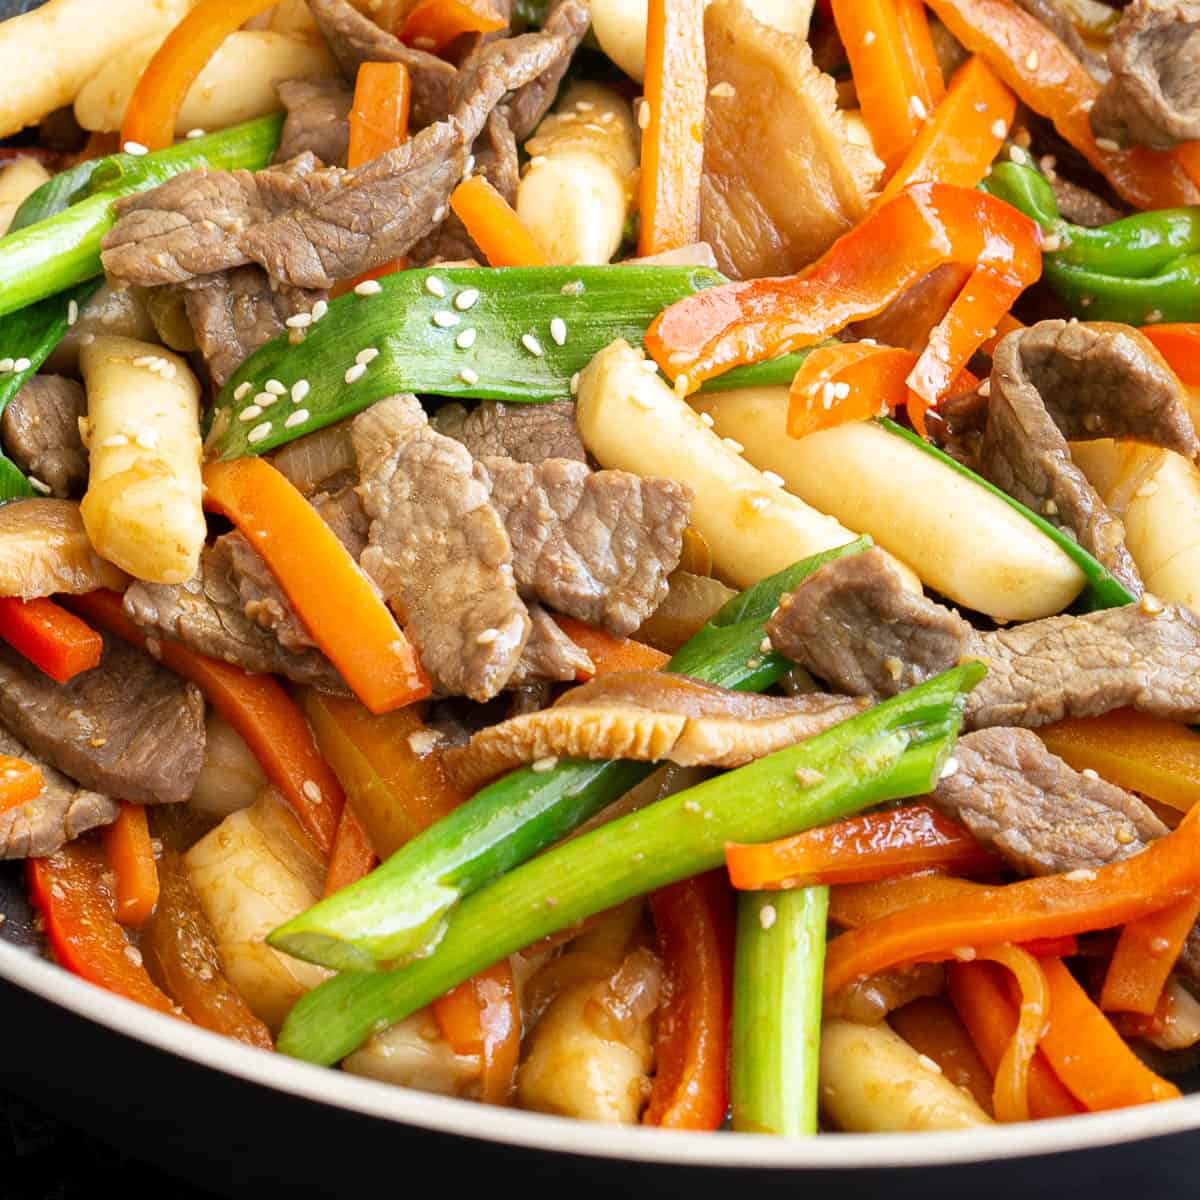 Close up shot of gungjung tteokbokki stir fry showing the cooked beef, rice cakes and vegetables.